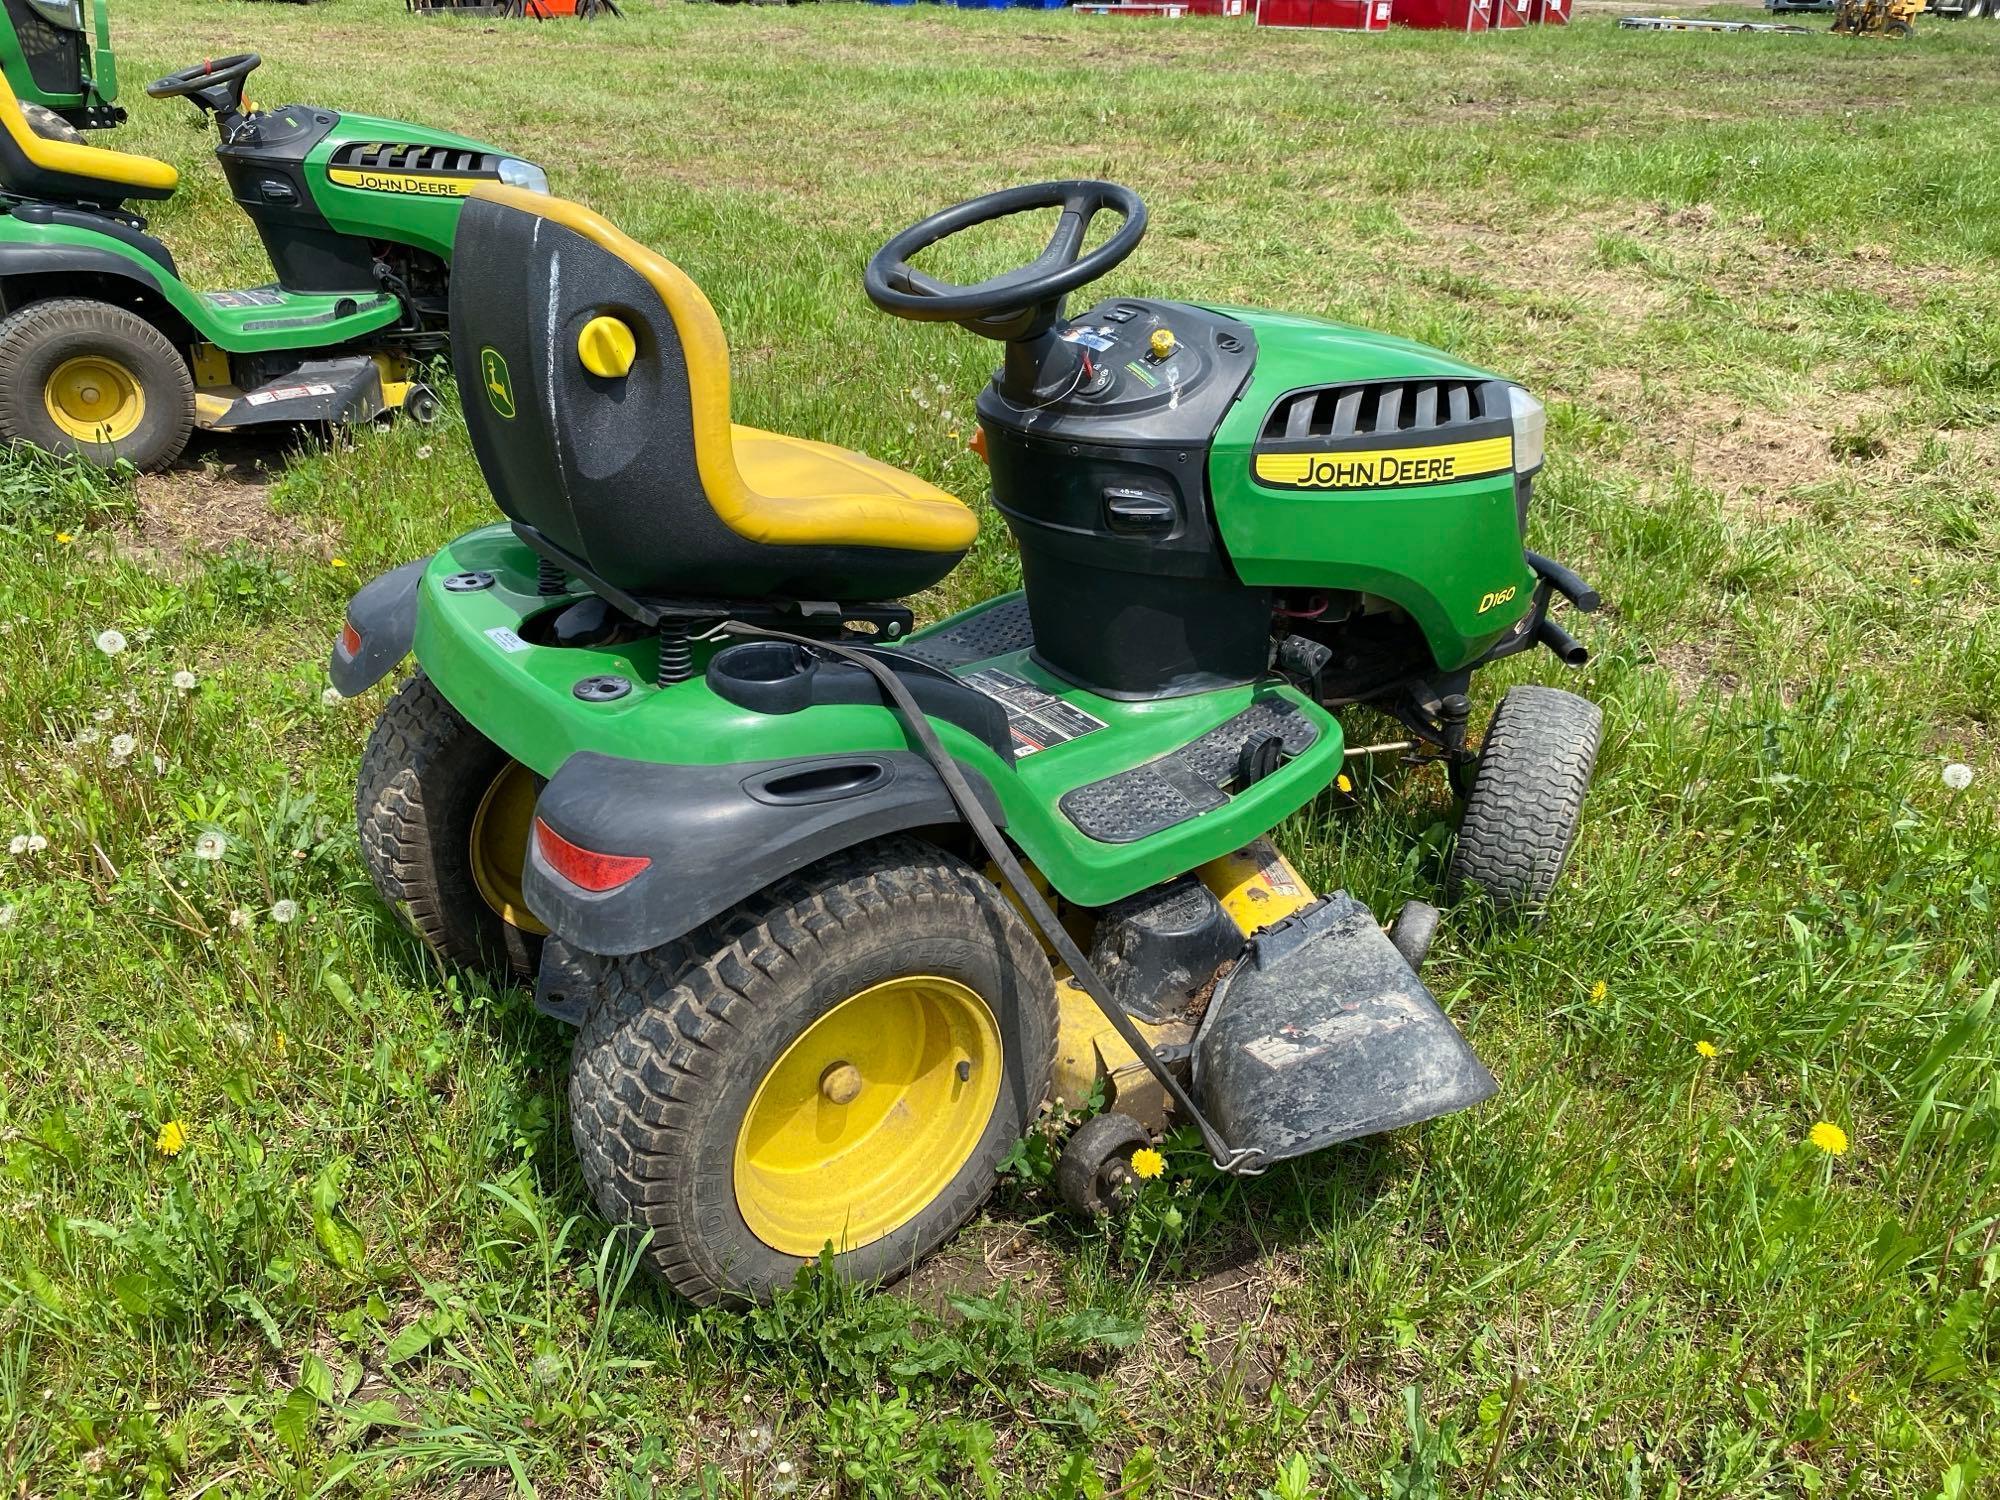 JOHN DEERE D160 LAWN & GARDEN TRACTOR powered by gas engine, equipped with 48in. cutting deck.